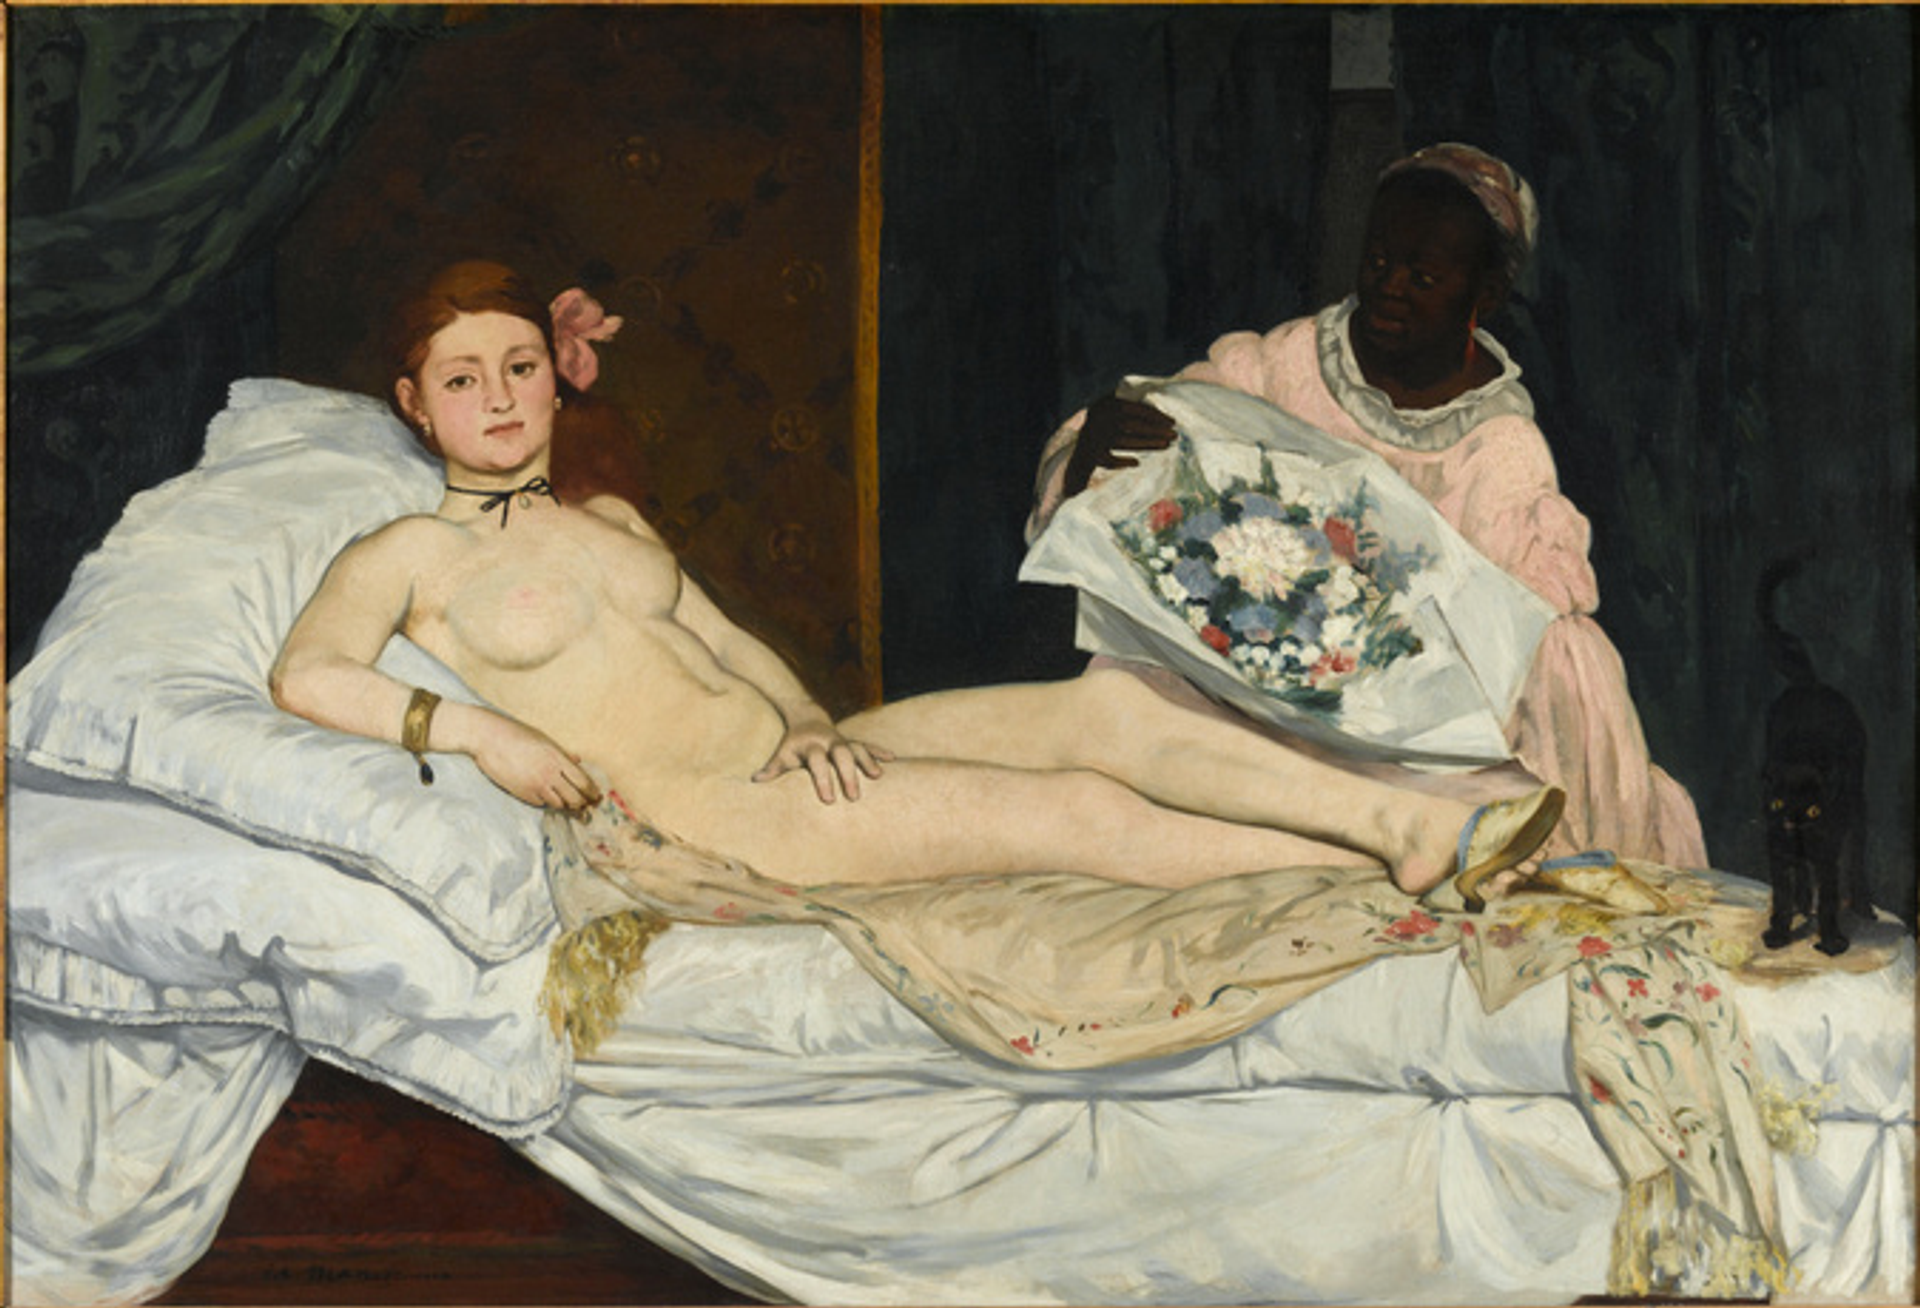 Edouard Manet’s Olympia. A nude woman laying on her bed, gazing directly into the eyes of the viewer. Beside her is her servant holding a pillow and her cat.